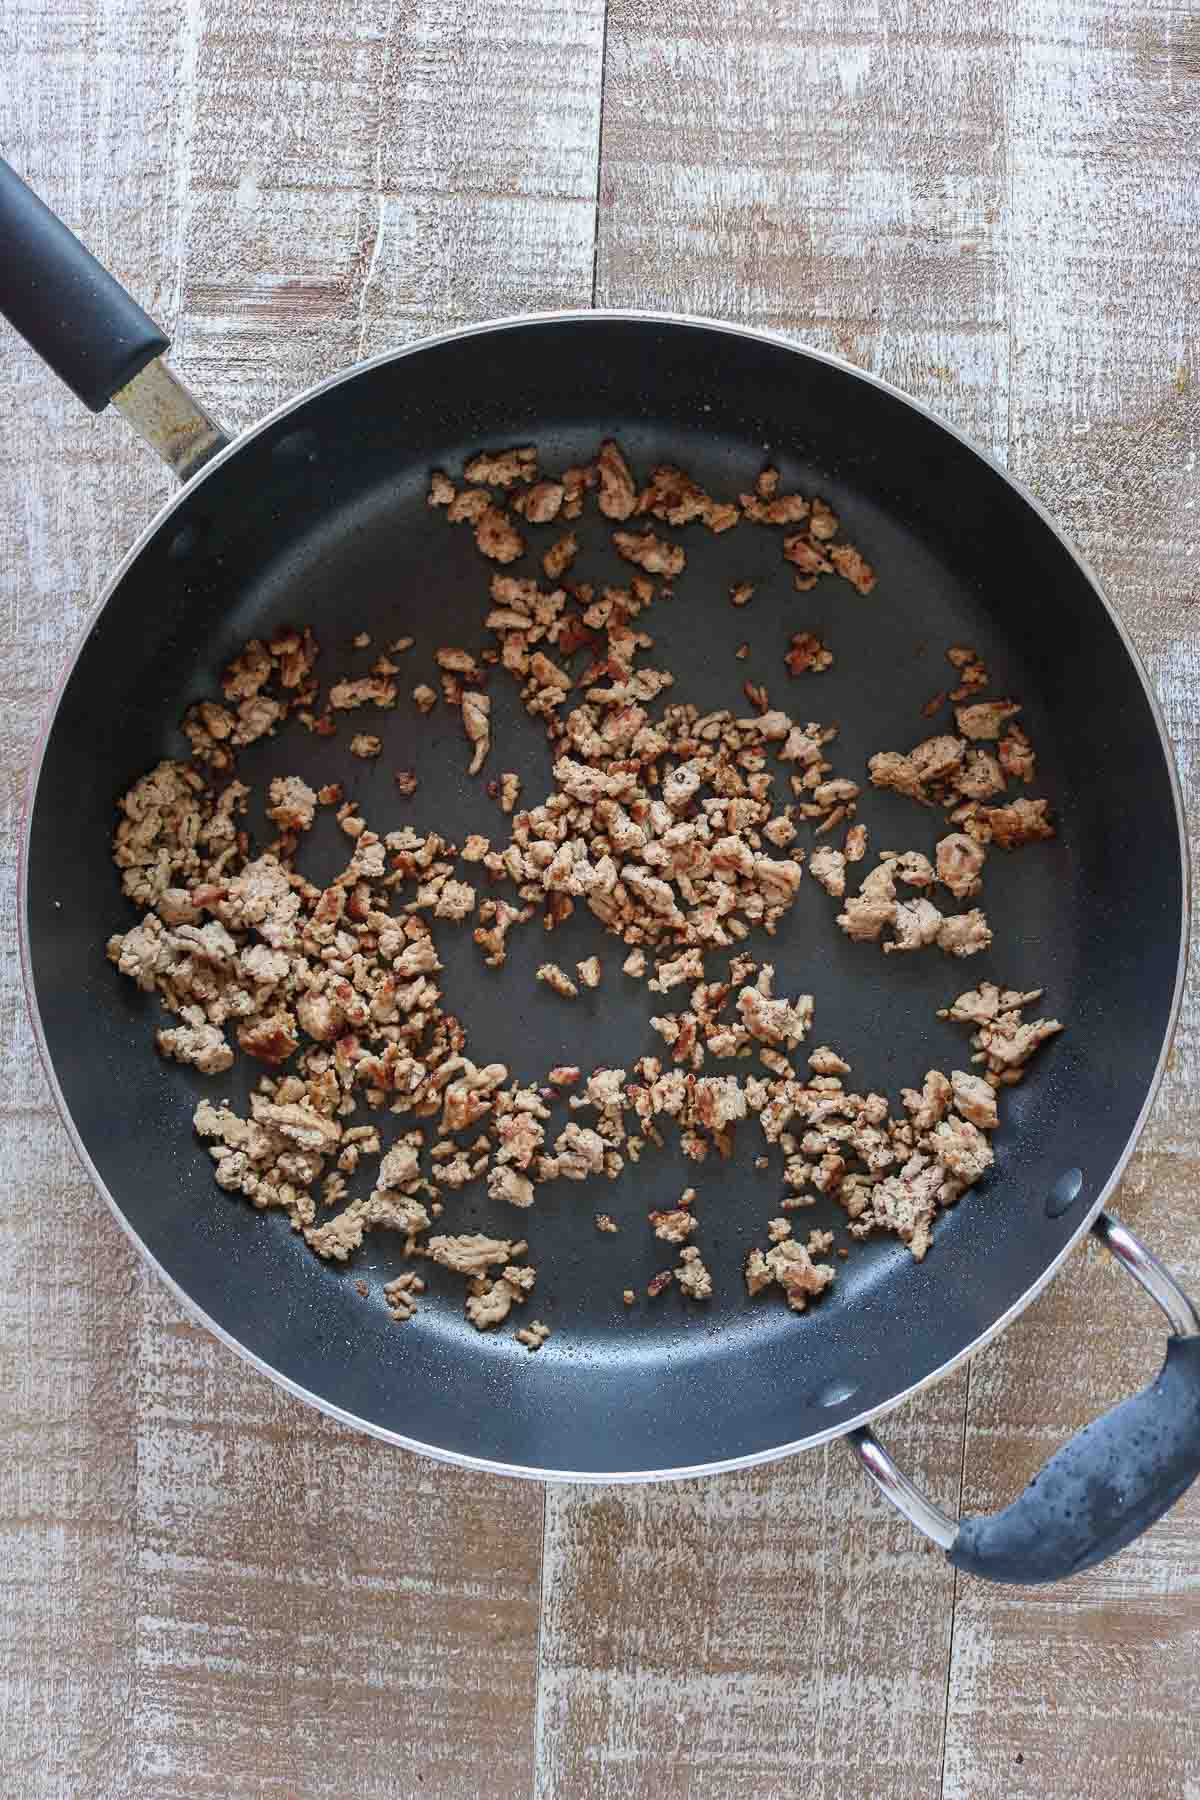 Cooked ground turkey in a non-stick pan.